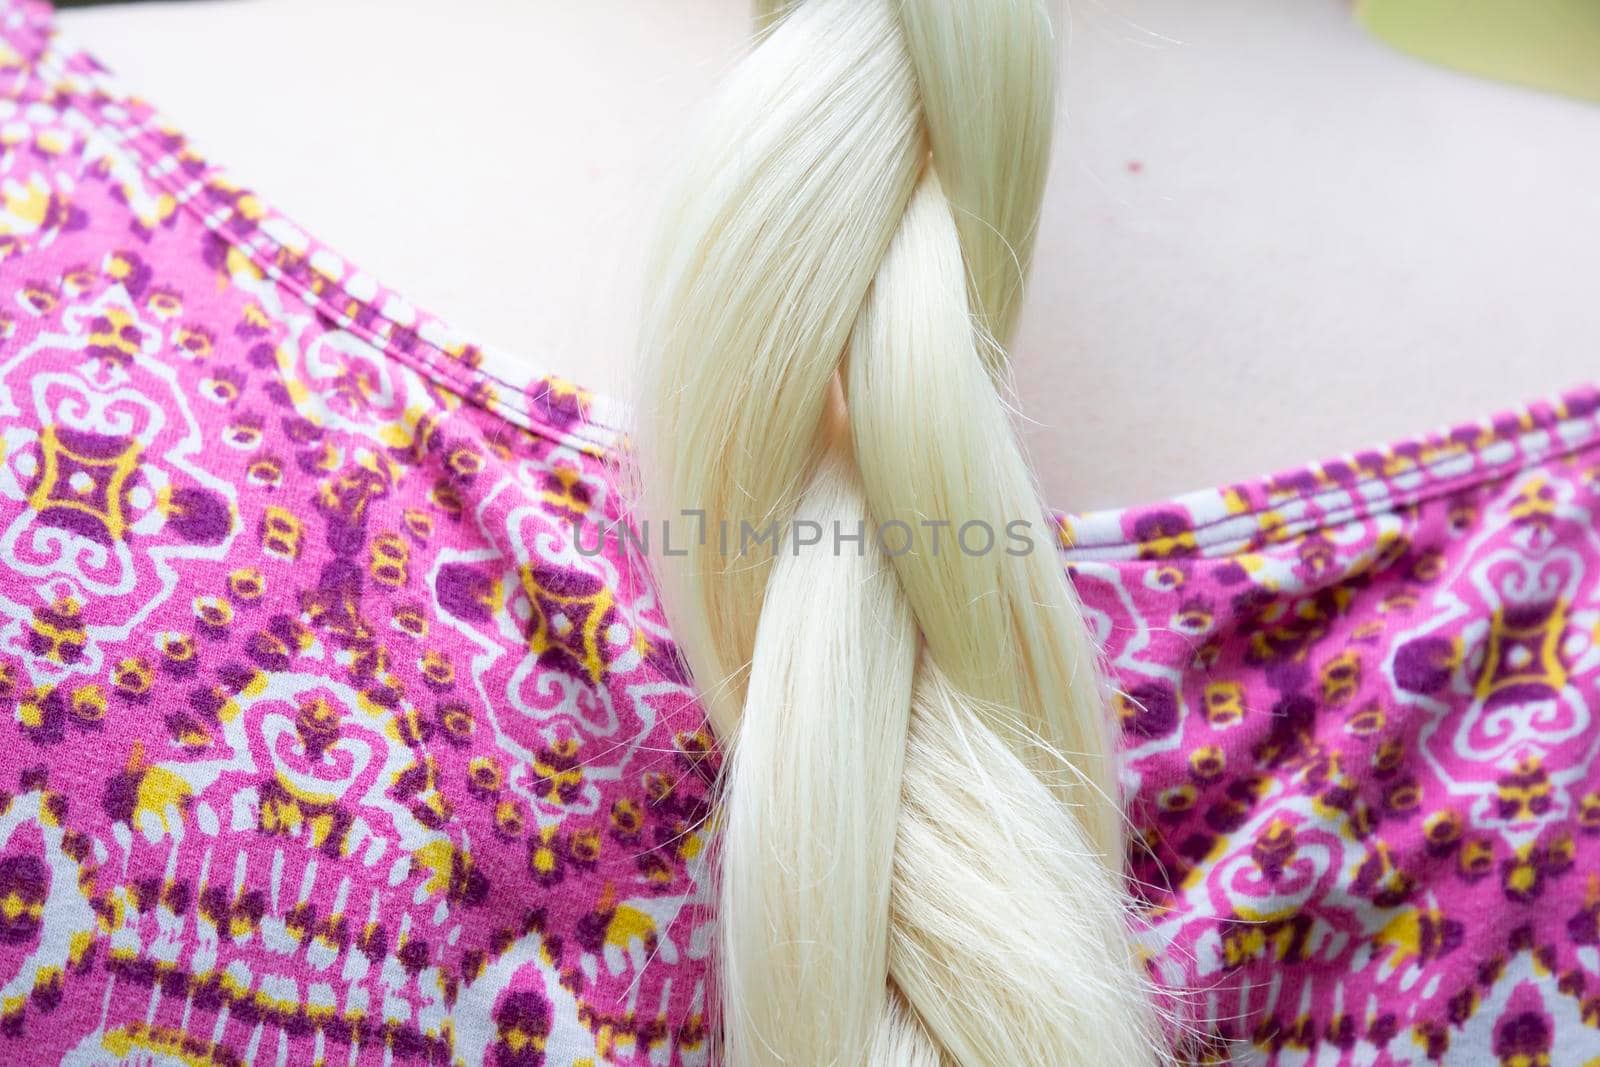 Close up of braided pleats in white hair